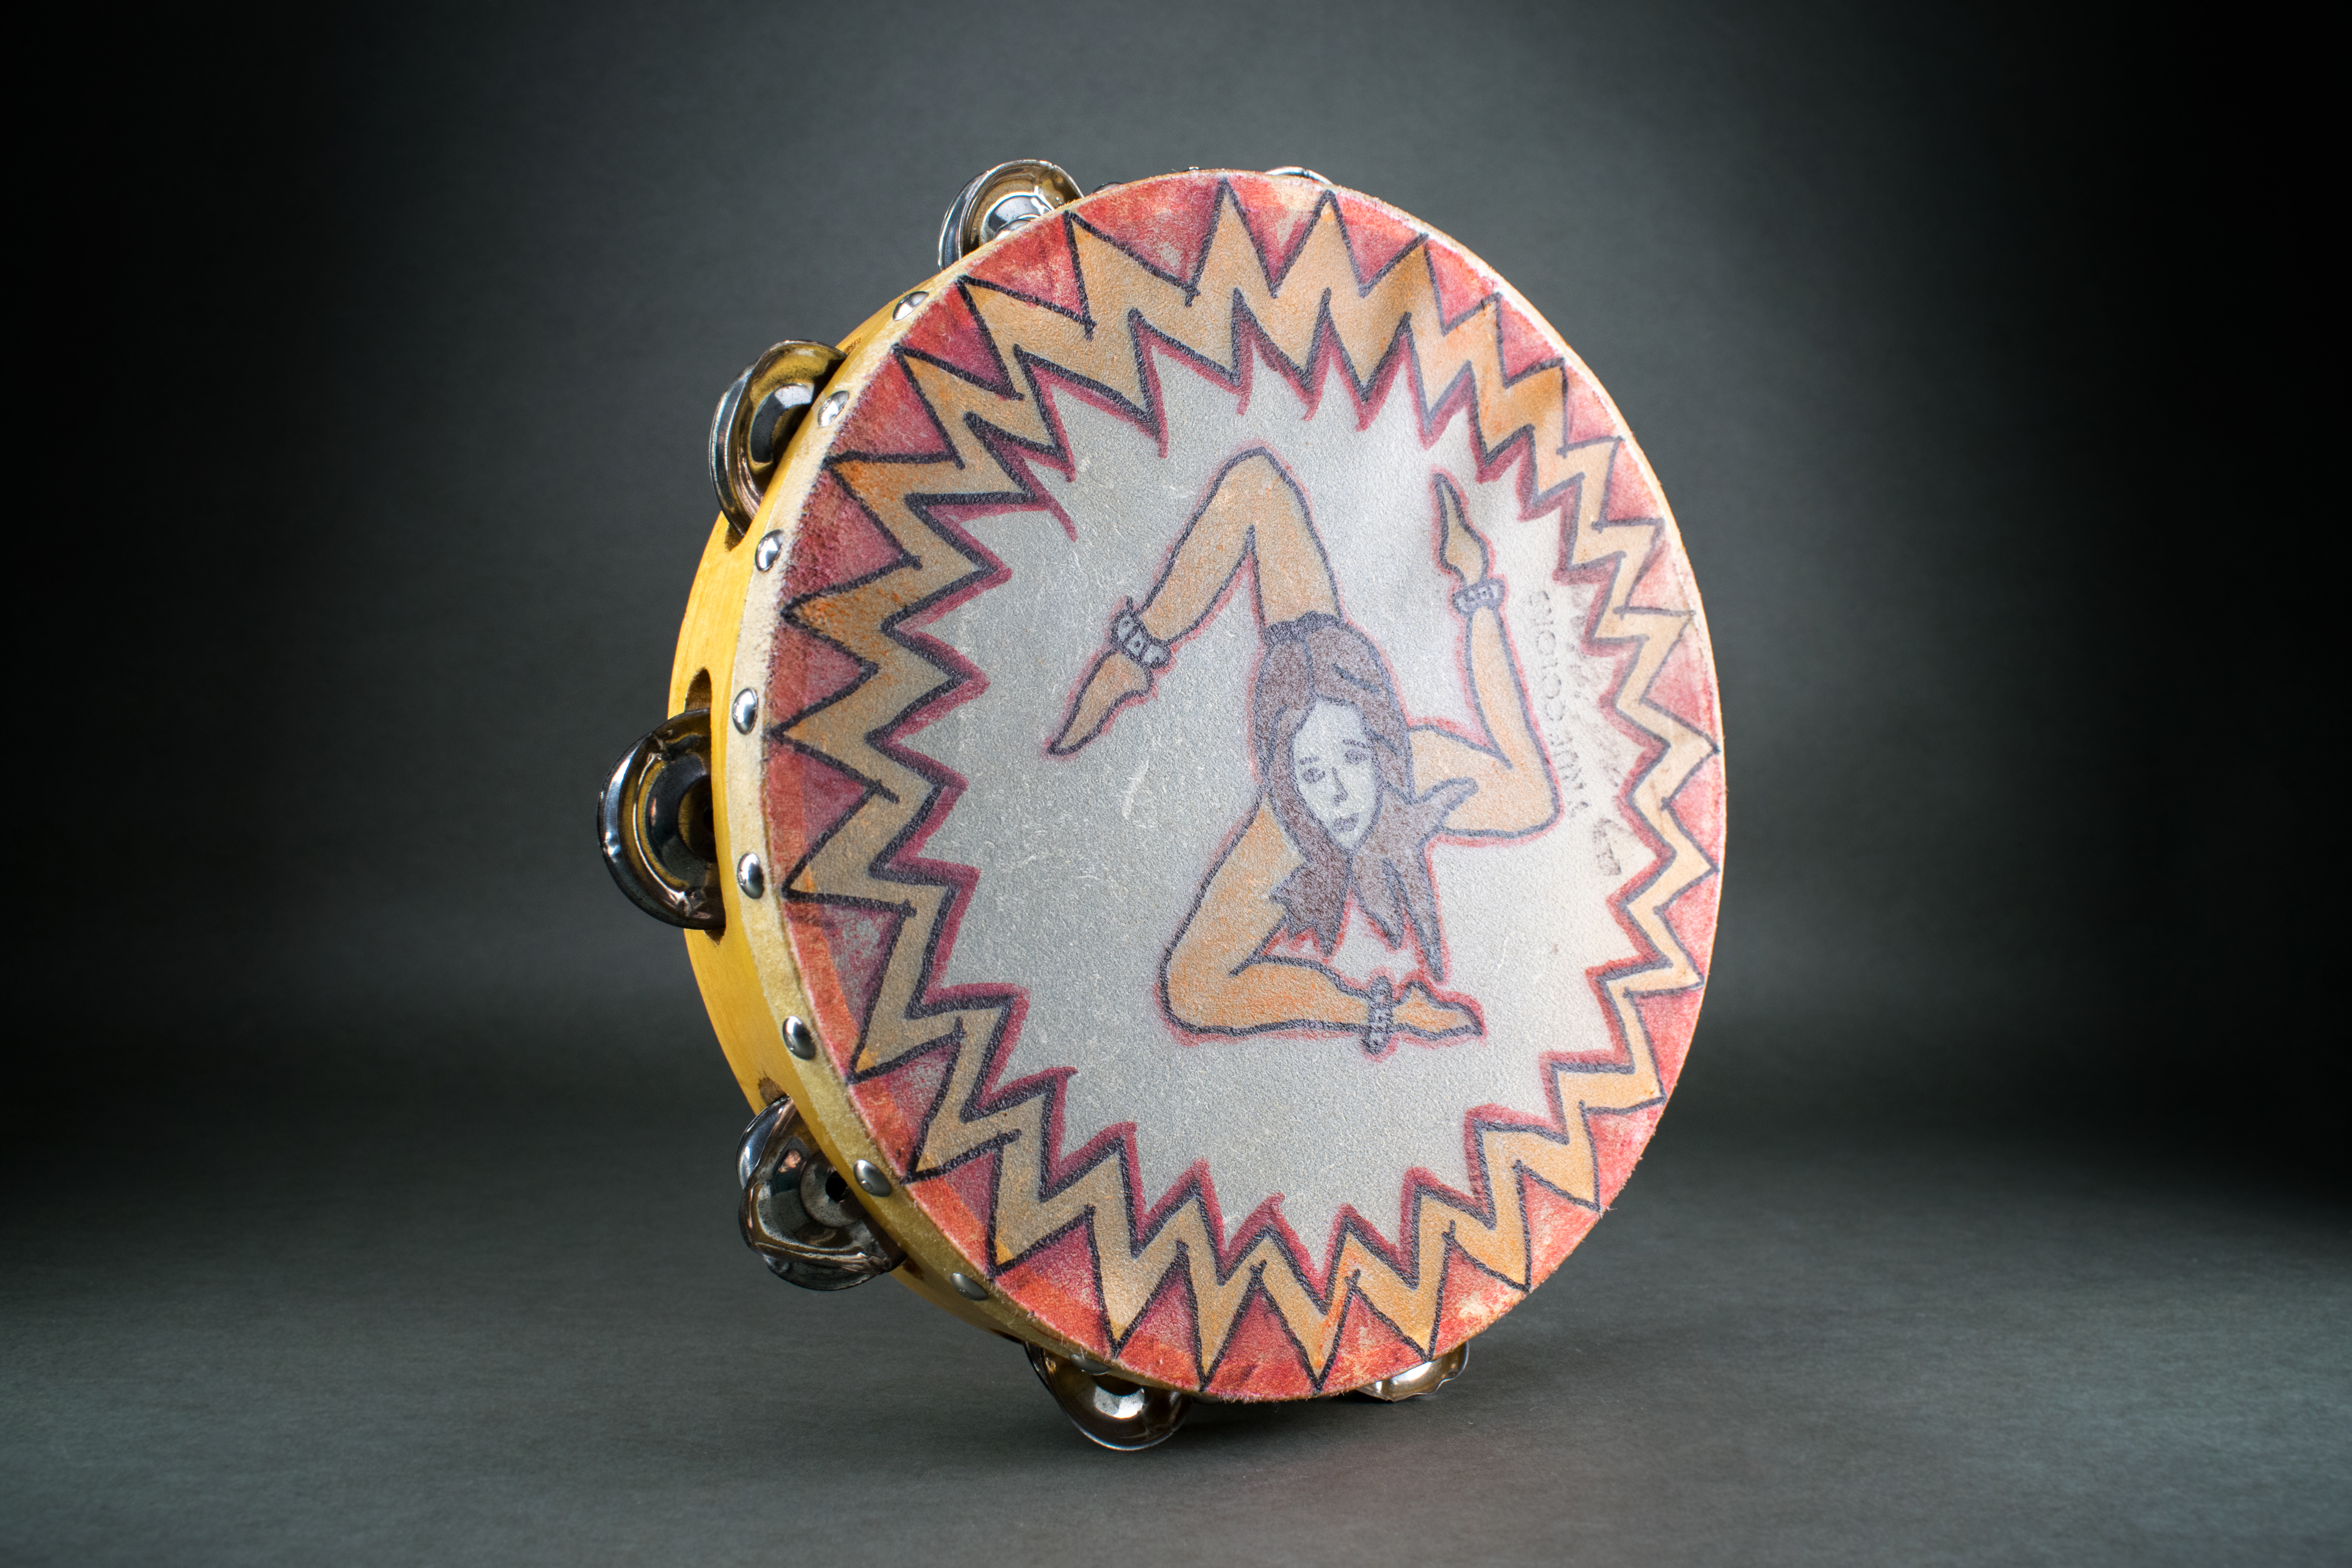 Tambourine for playing the Tarantella, hand-painted, around 1985. DOMiD Archive, Cologne, E 0893,0002. The association Associazione Genitori Italiani di Colonia (“Association of Italian Parents in Cologne”) also included a folklore dance group. It was founded in 1981 and was dedicated to the Tarantella, a folk dance from southern Italy. In 2005 the association had 230 members. The history of origin says that the rapid rhythm of the tarantella should encourage patients bitten by a tarantula to dance quickly until they are completely exhausted. This is said to drive animal poison out of the body. A typical rhythm instrument is the tambourine, here adorned with the triskele of the flag of Sicily.